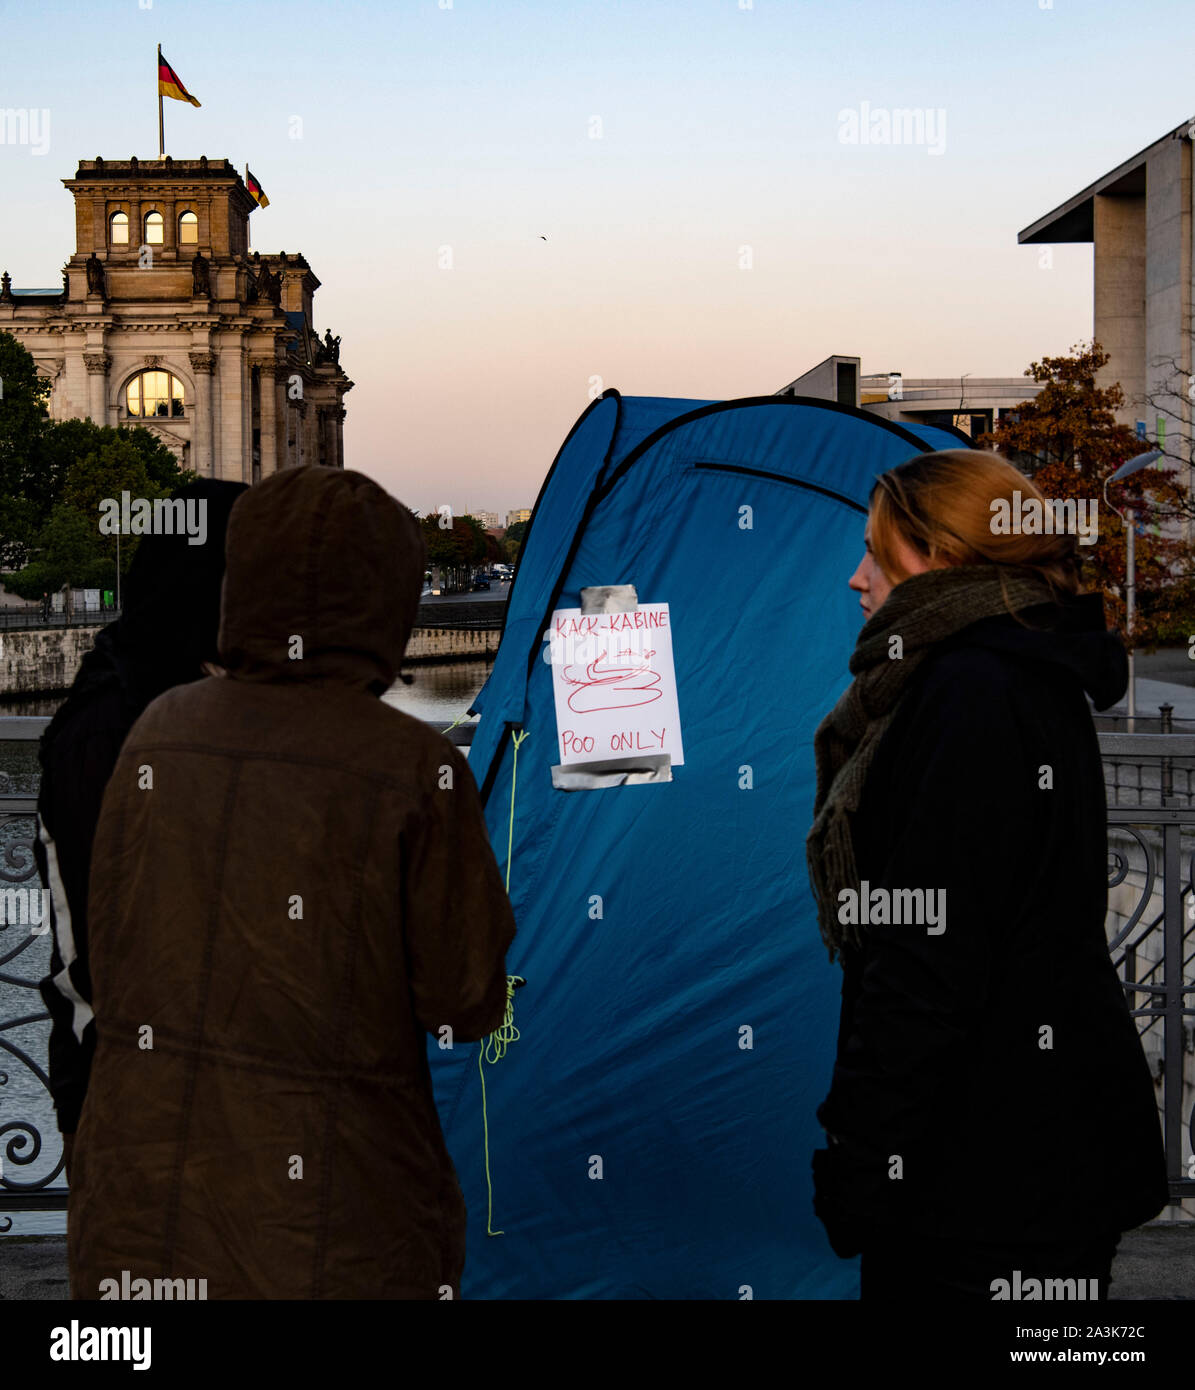 Berlin, Germany. 09th Oct, 2019. Demonstrators stand in front of a mobile toilet cabin with the inscription 'Kack-Kabine Poo only' on the Marschallbrücke bridge. This was occupied early in the morning by about 300 activists of the environmental movement Extinction Rebellion. Credit: Paul Zinken/dpa/Alamy Live News Stock Photo